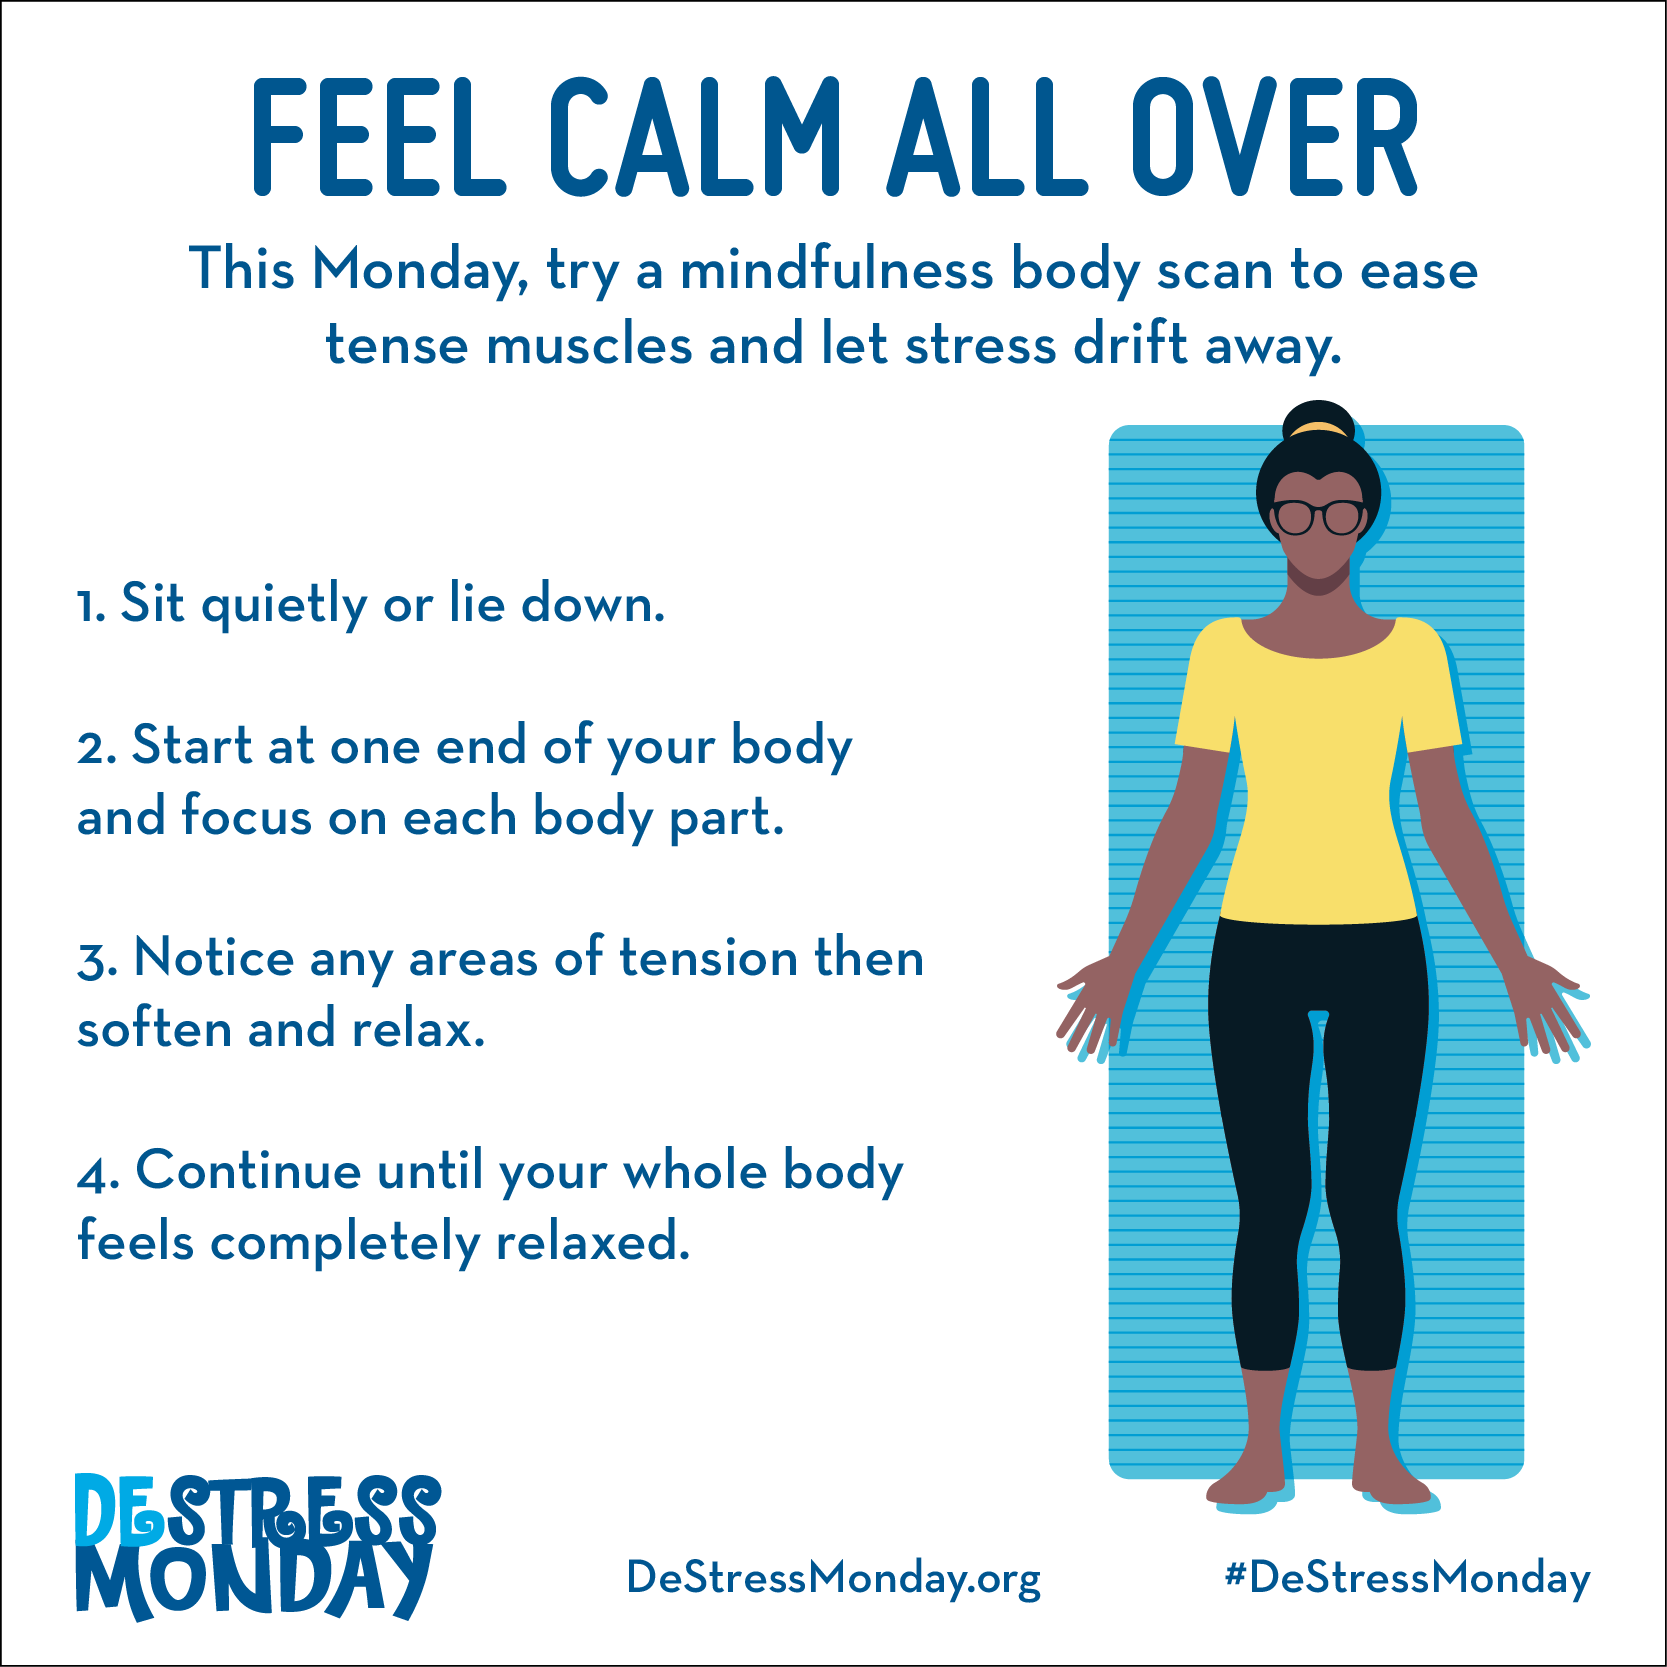 Beat Stress This Monday with a Mindful Body Scan 